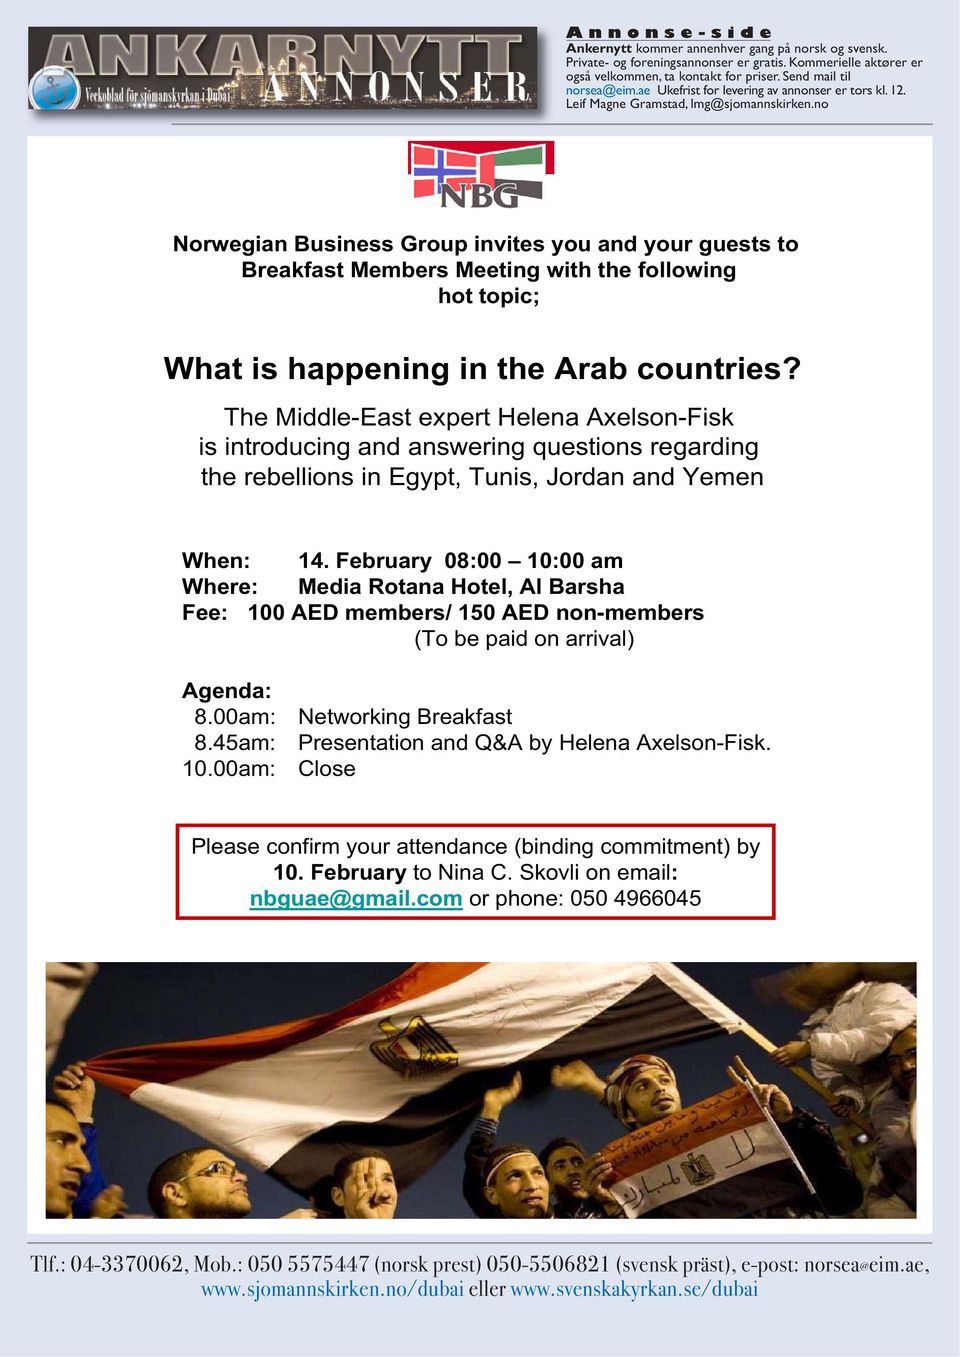 no Norwegian Business Group invites you and your guests to Breakfast Members Meeting with the following hot topic; What is happening in the Arab countries?